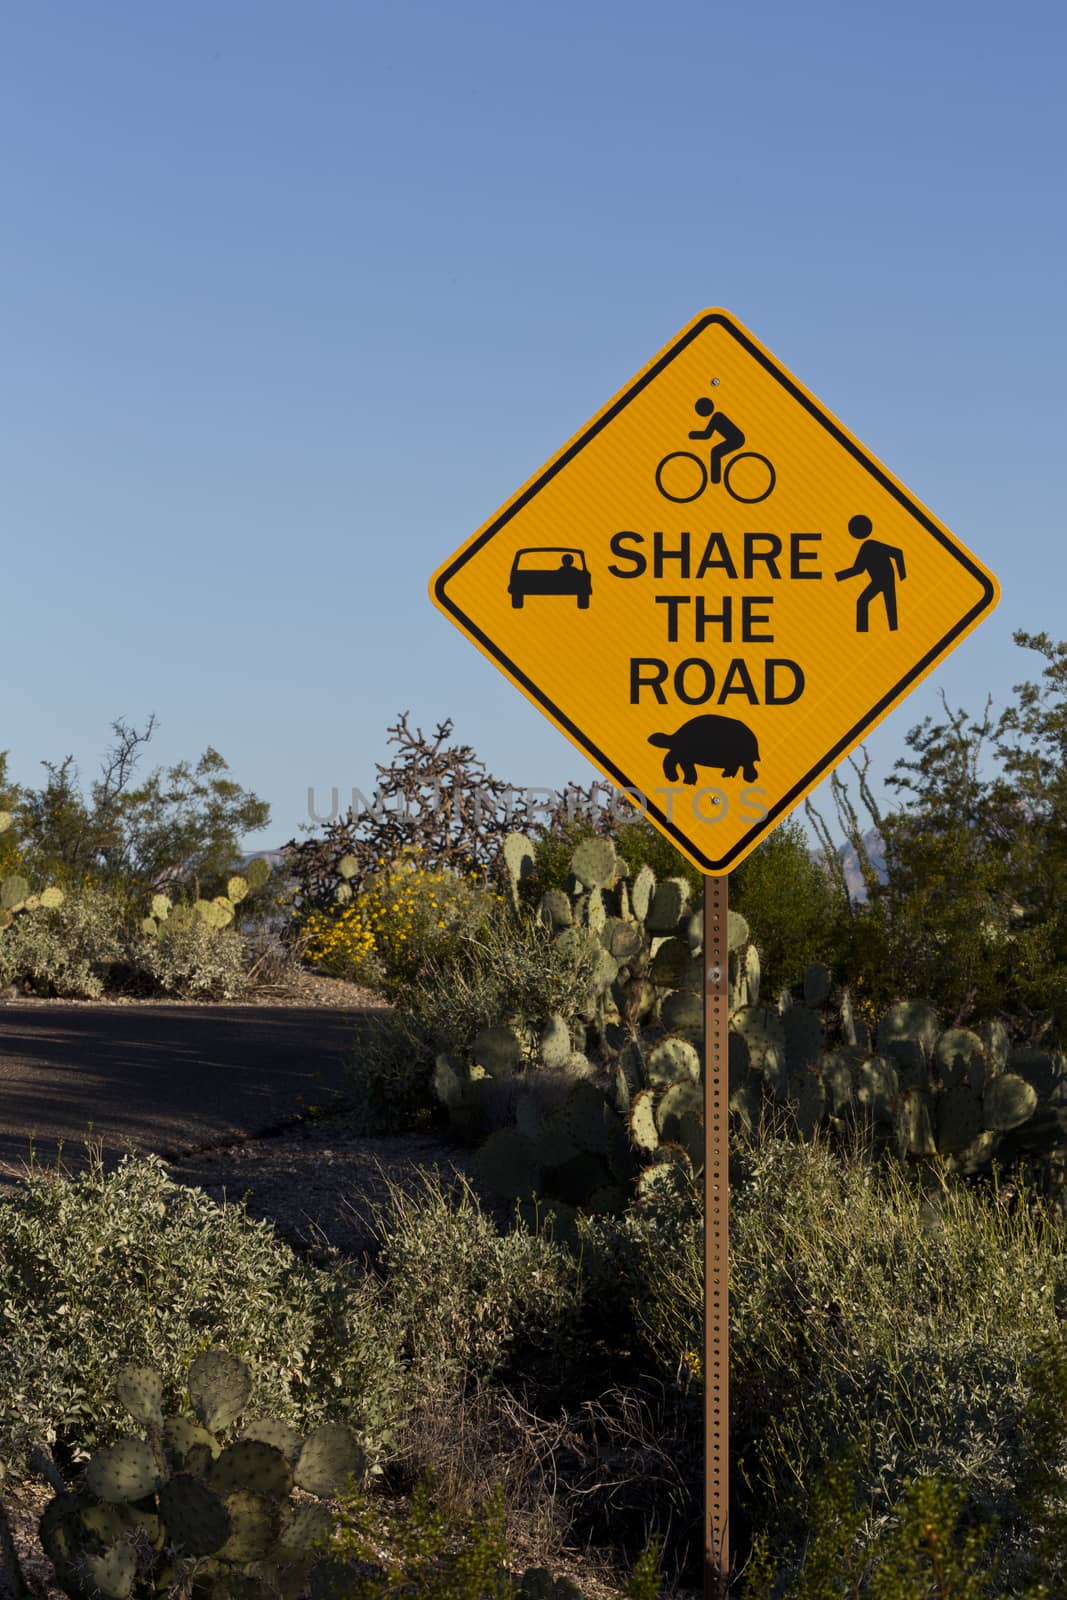 In bicycle friendly Saguaro National Park, a Share the Road sign warns that roadway must be shared by cars, bicyclists, walkers, and desert wildlife, including slow moving tortoises.  Location is Tucson, Arizona.  